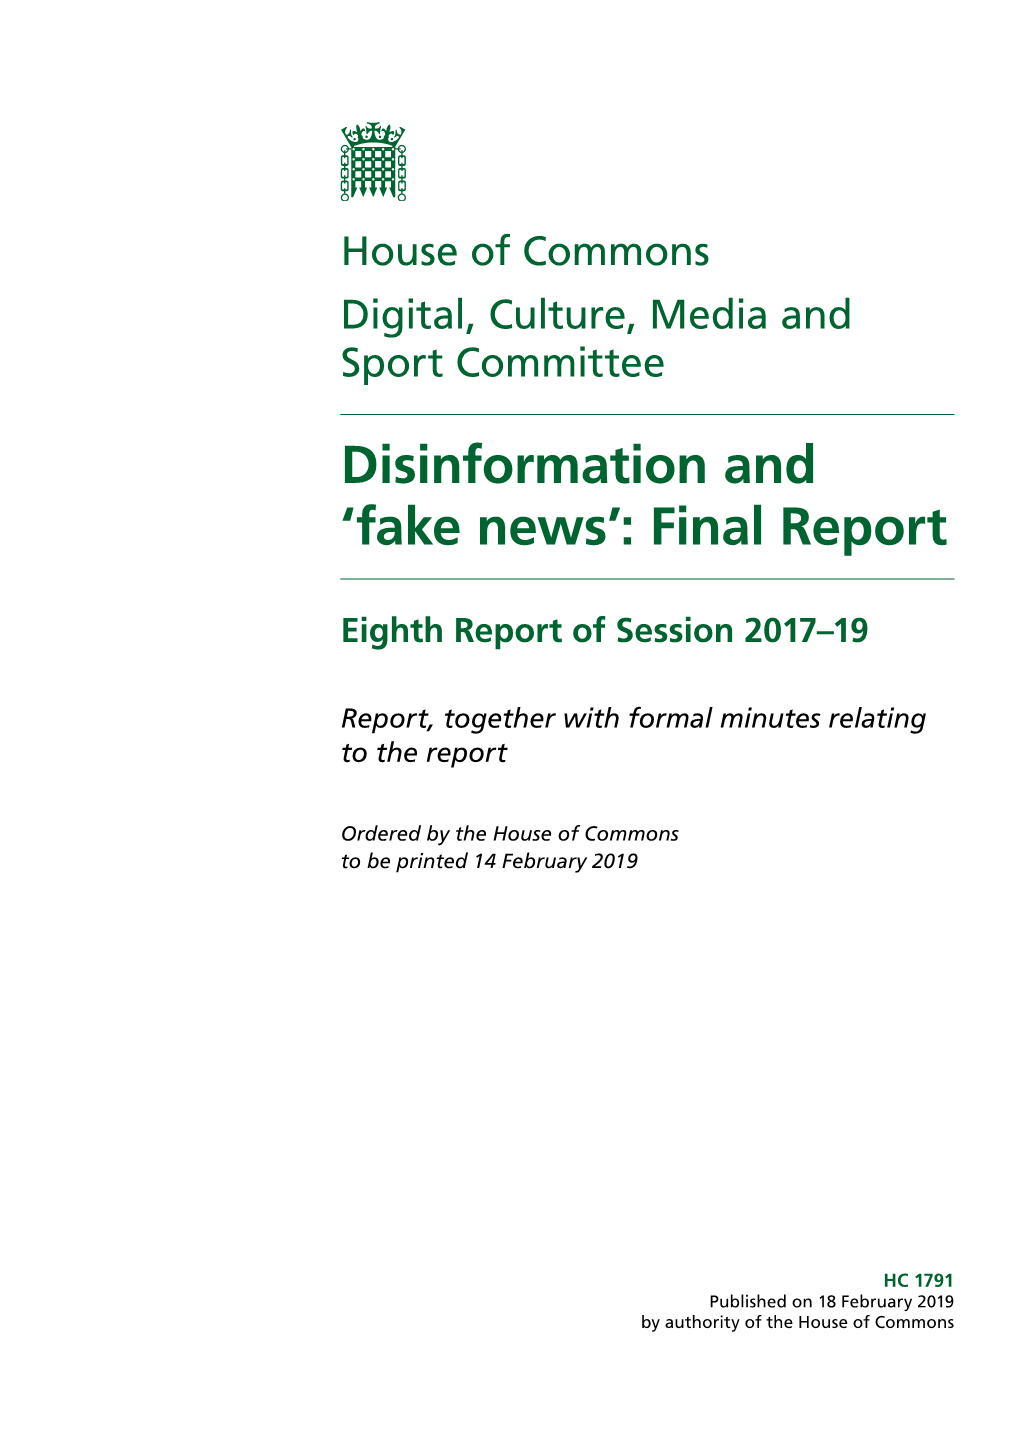 Disinformation and 'Fake News': Final Report